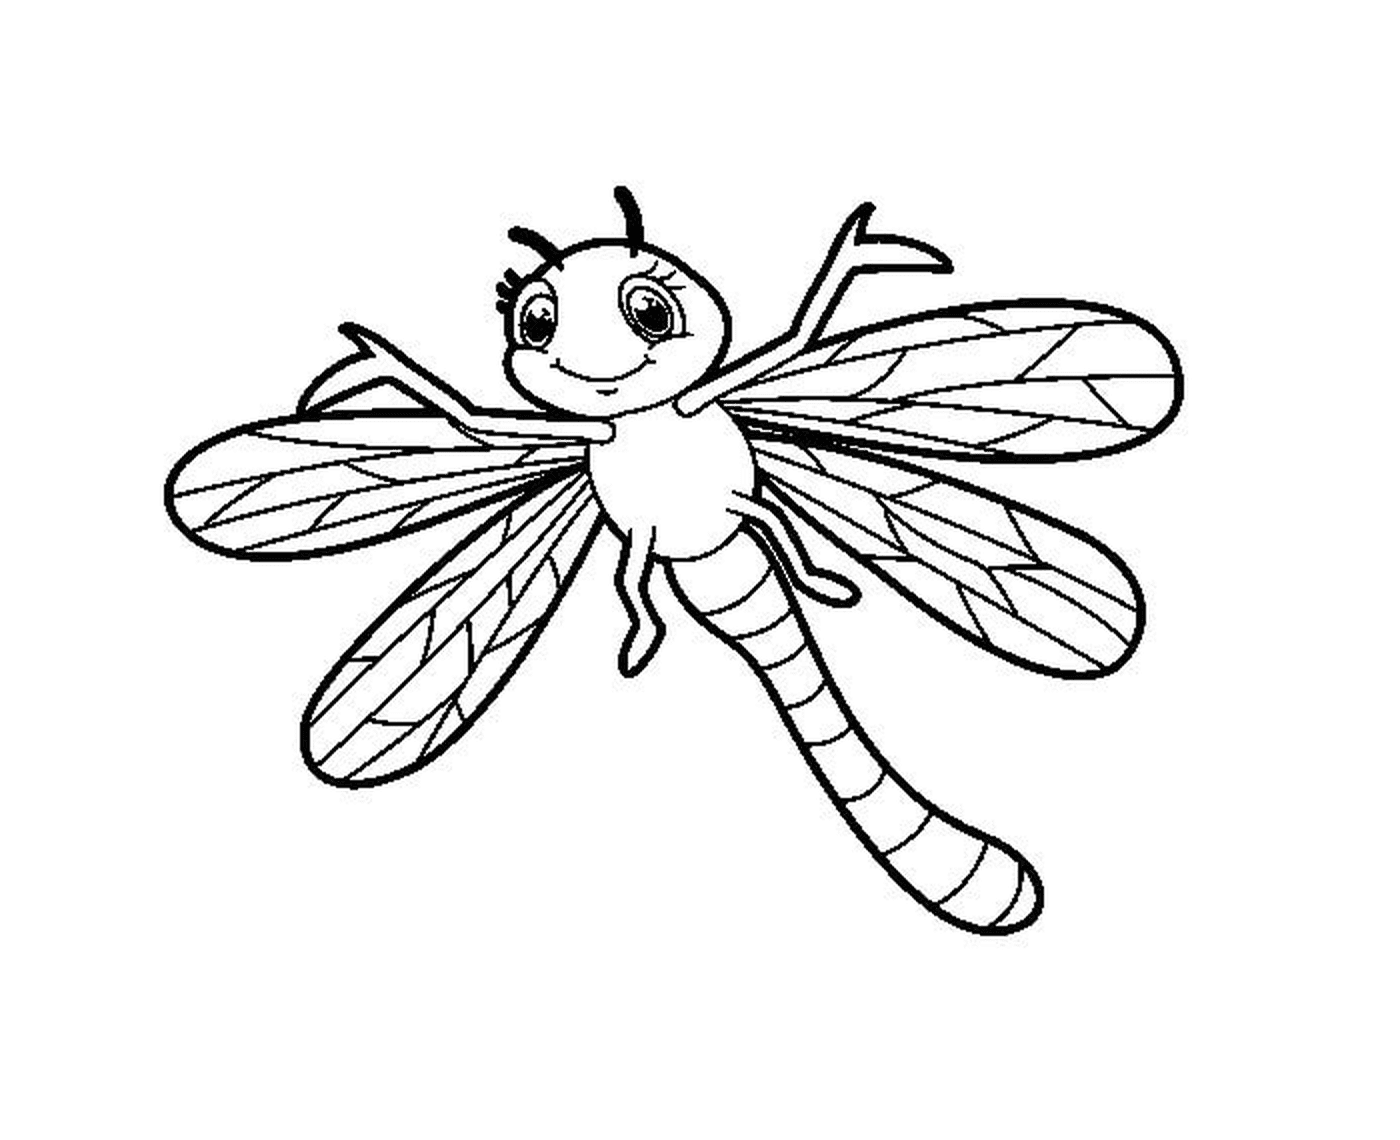  Smileful wording, an adorable insect 